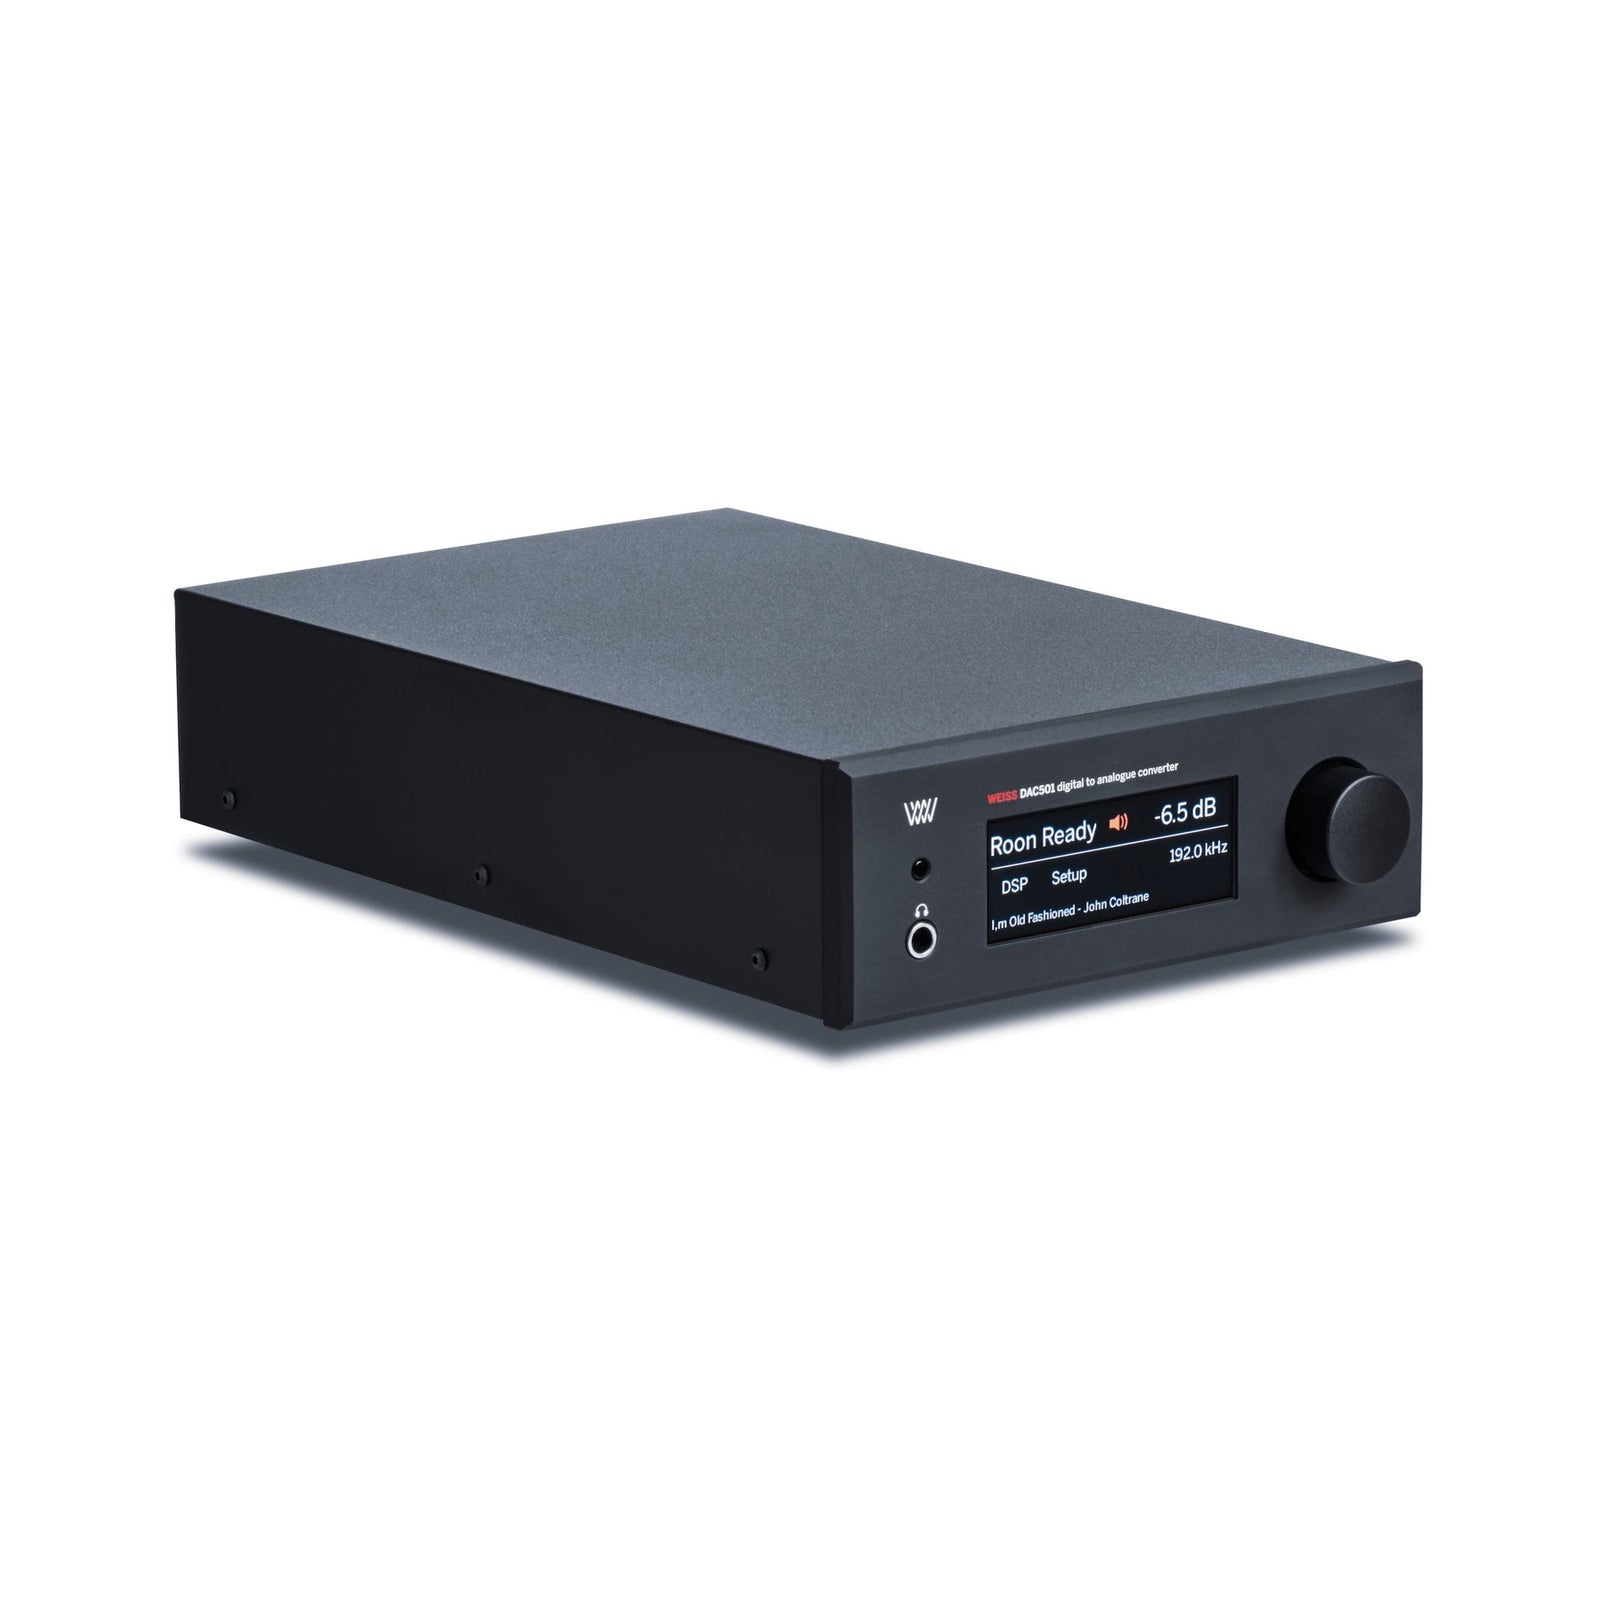 The DAC501 is a state of the art D/A Converter with an unprecedented level of sophistication and versatility. With the DAC501 is creating a new paradigm for what used to be a black box device. A typical D/A Converter is a "set and forget" device. Not so with the DAC501